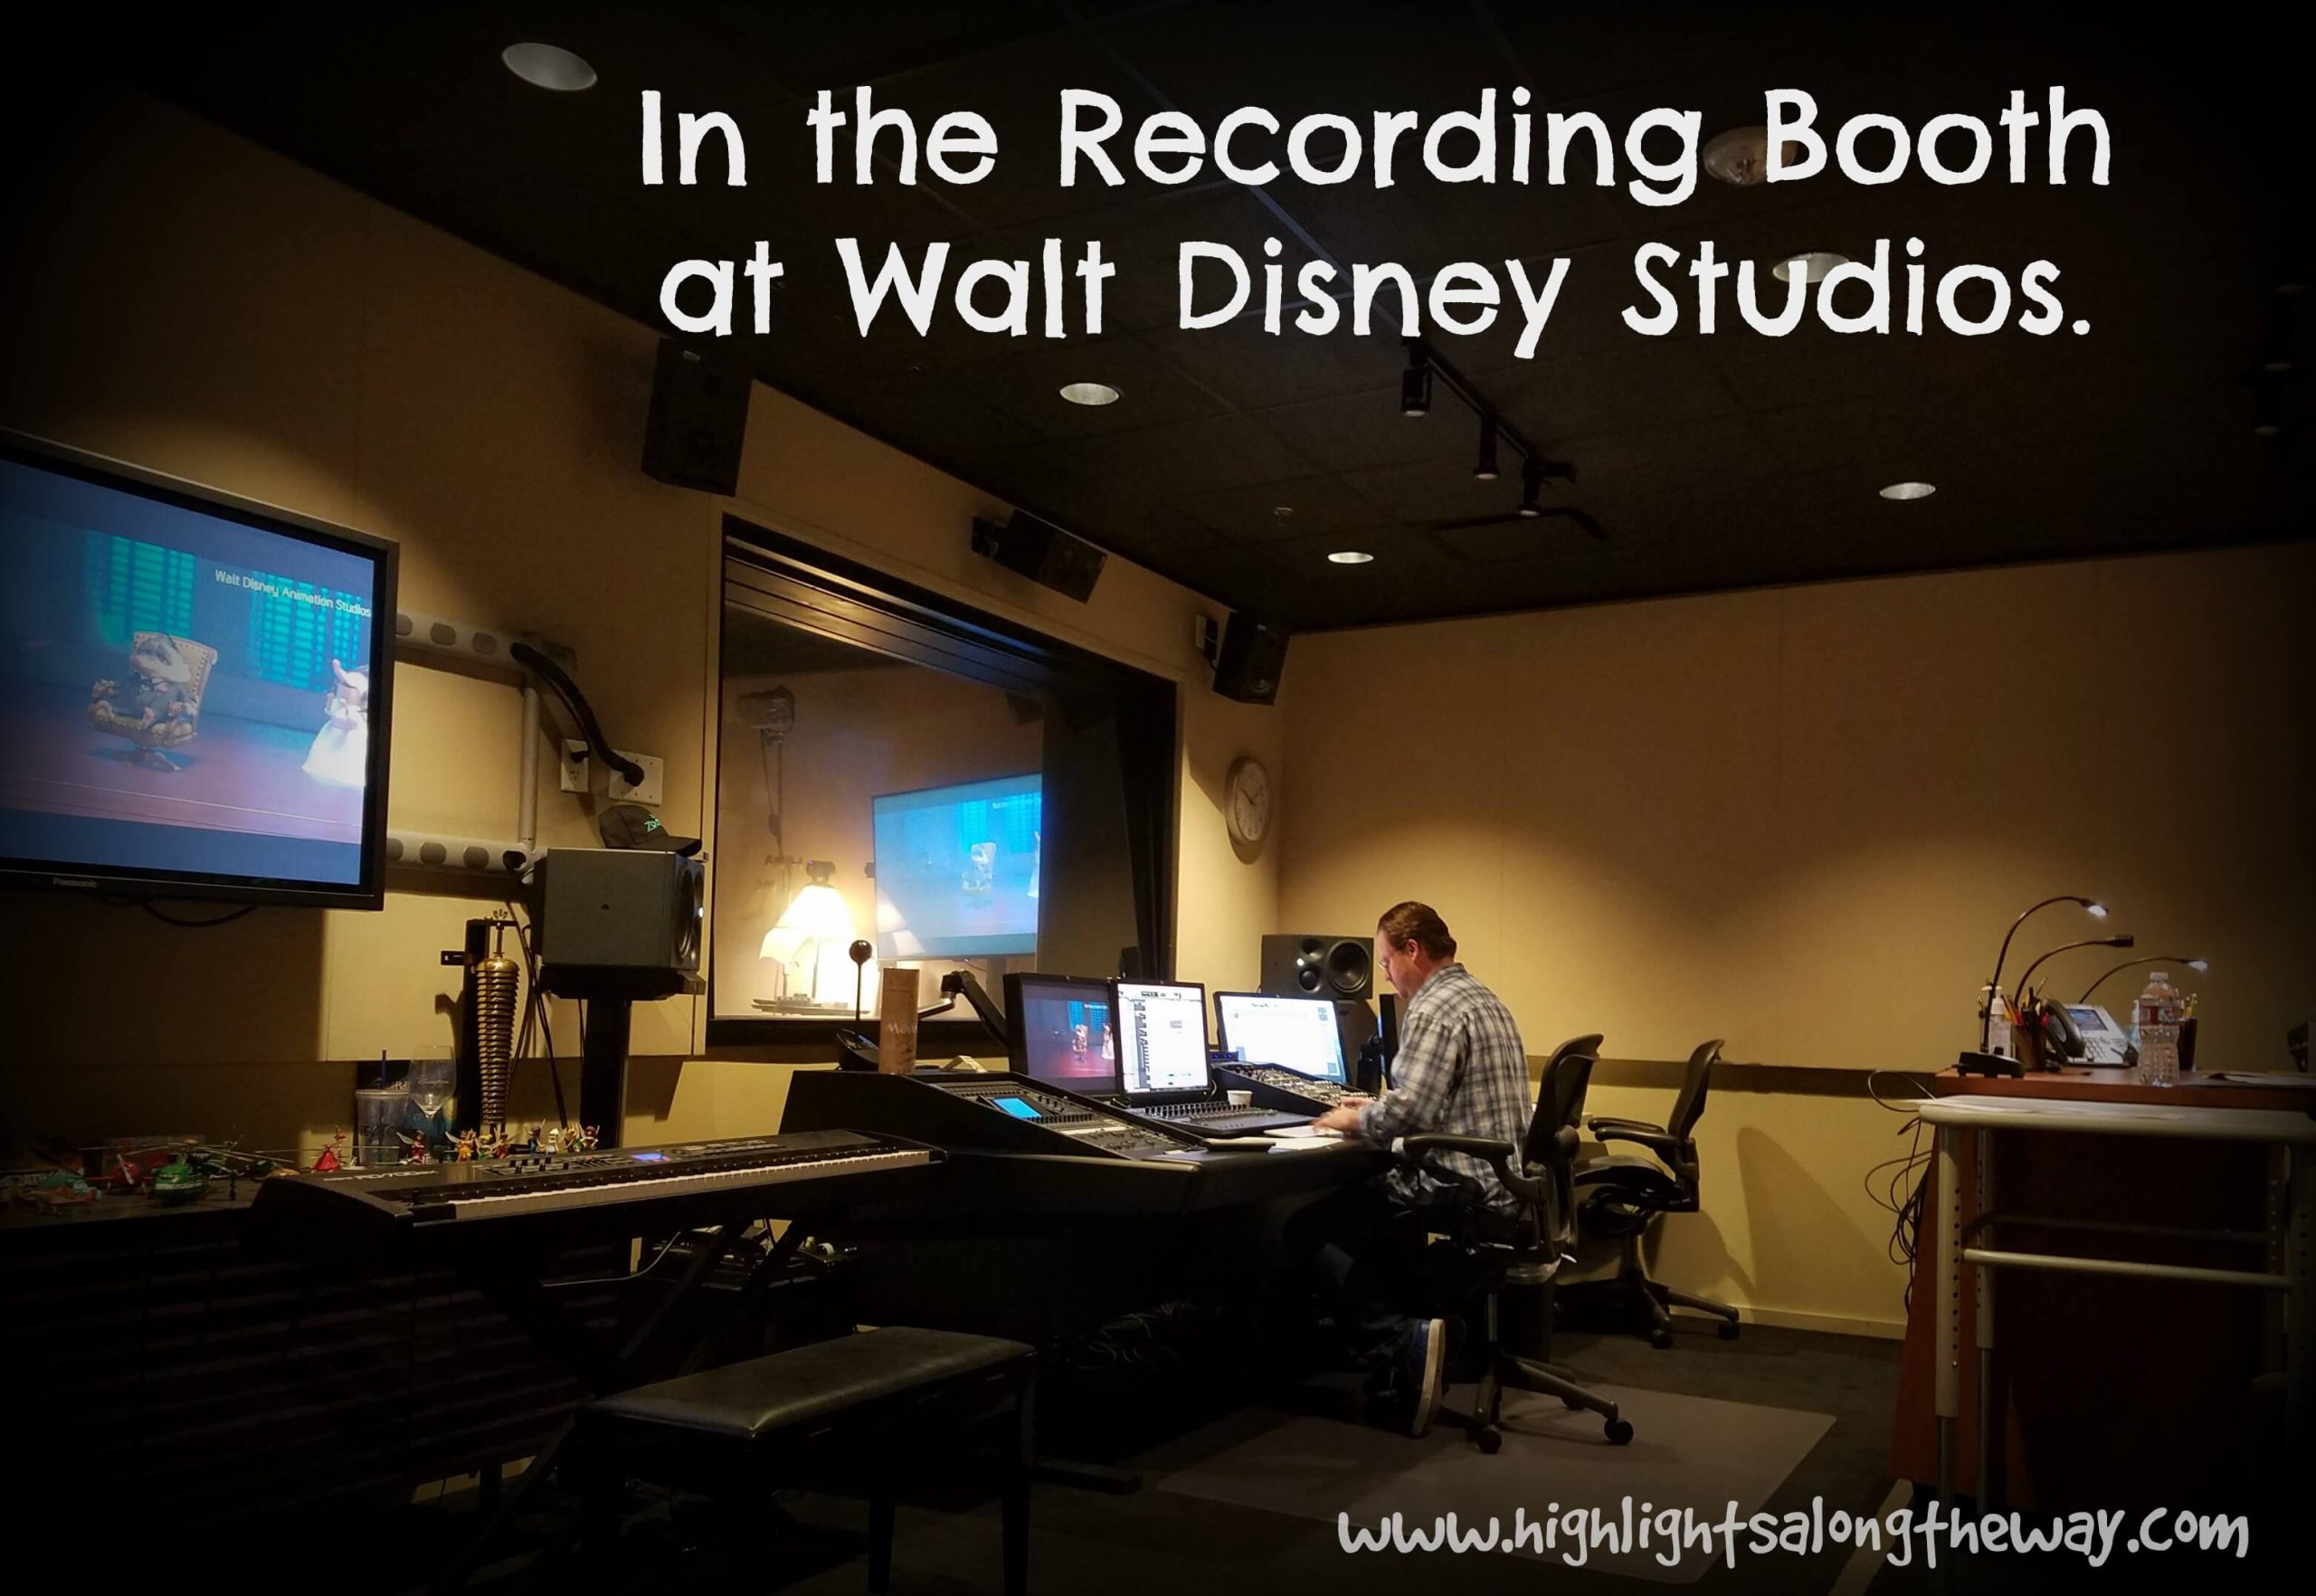 In the Recording booth at Walt Disney Studios